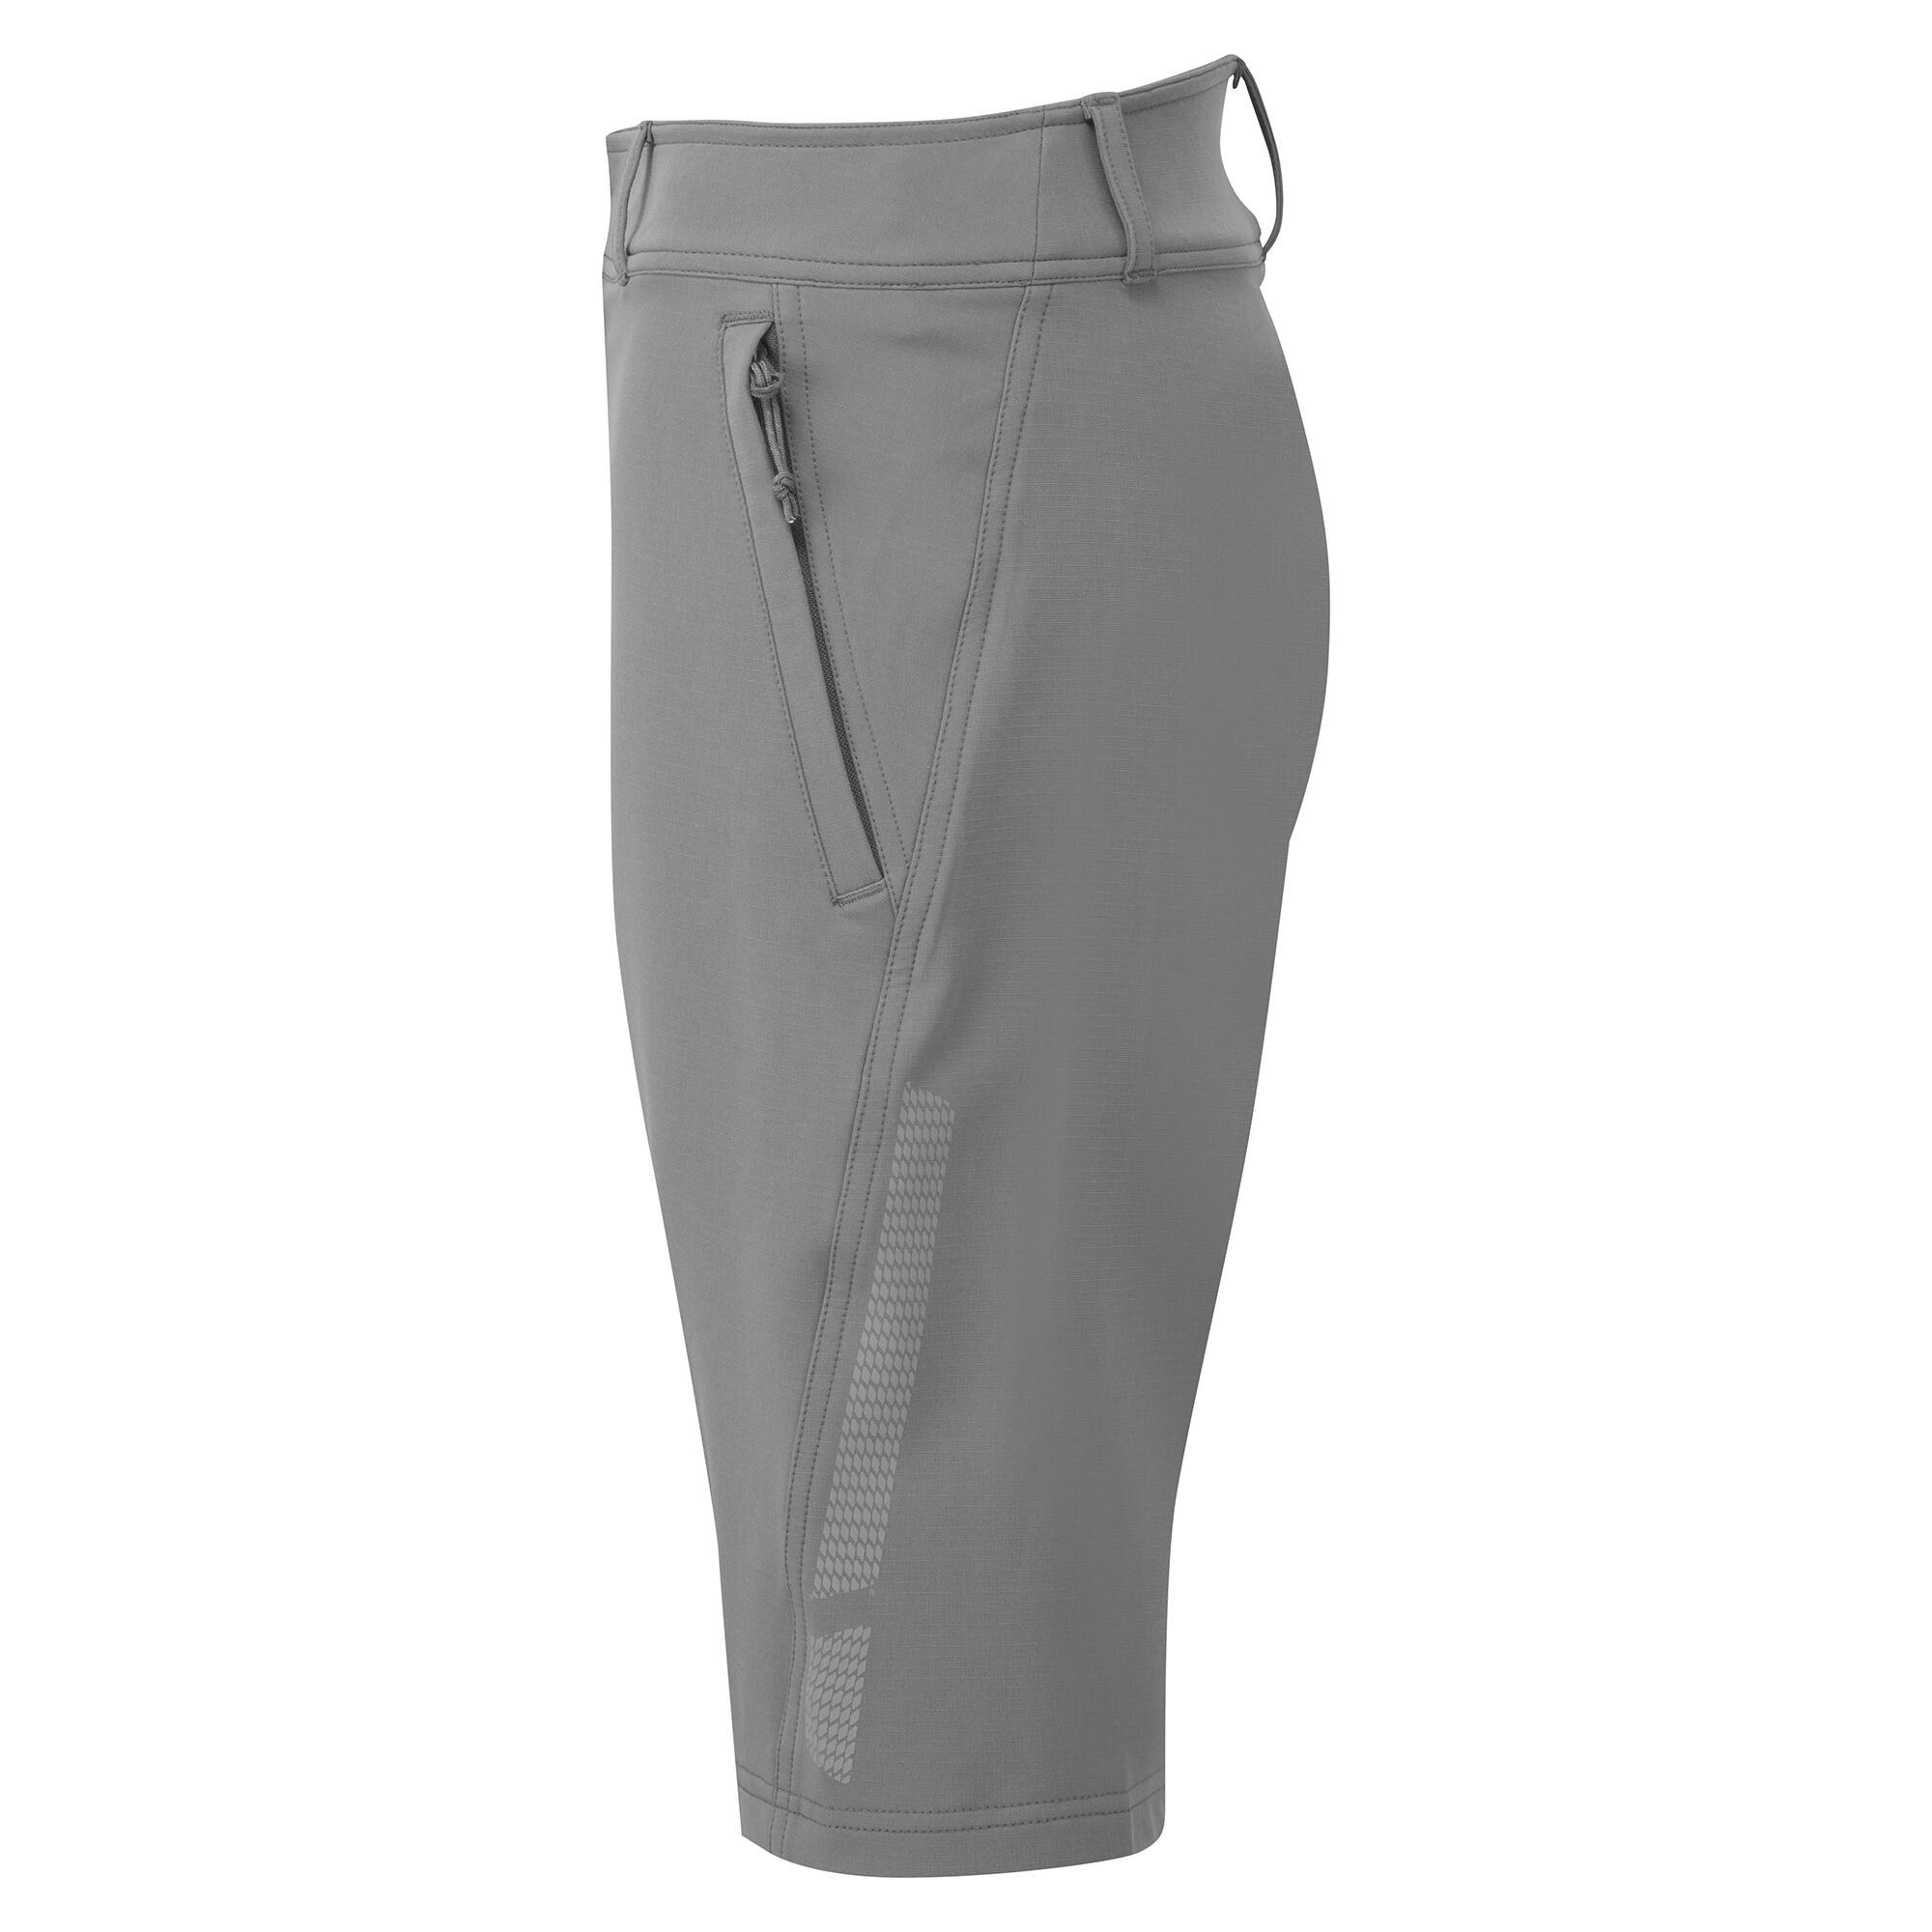 All Roads Women's Repel Cycling Shorts 4/5